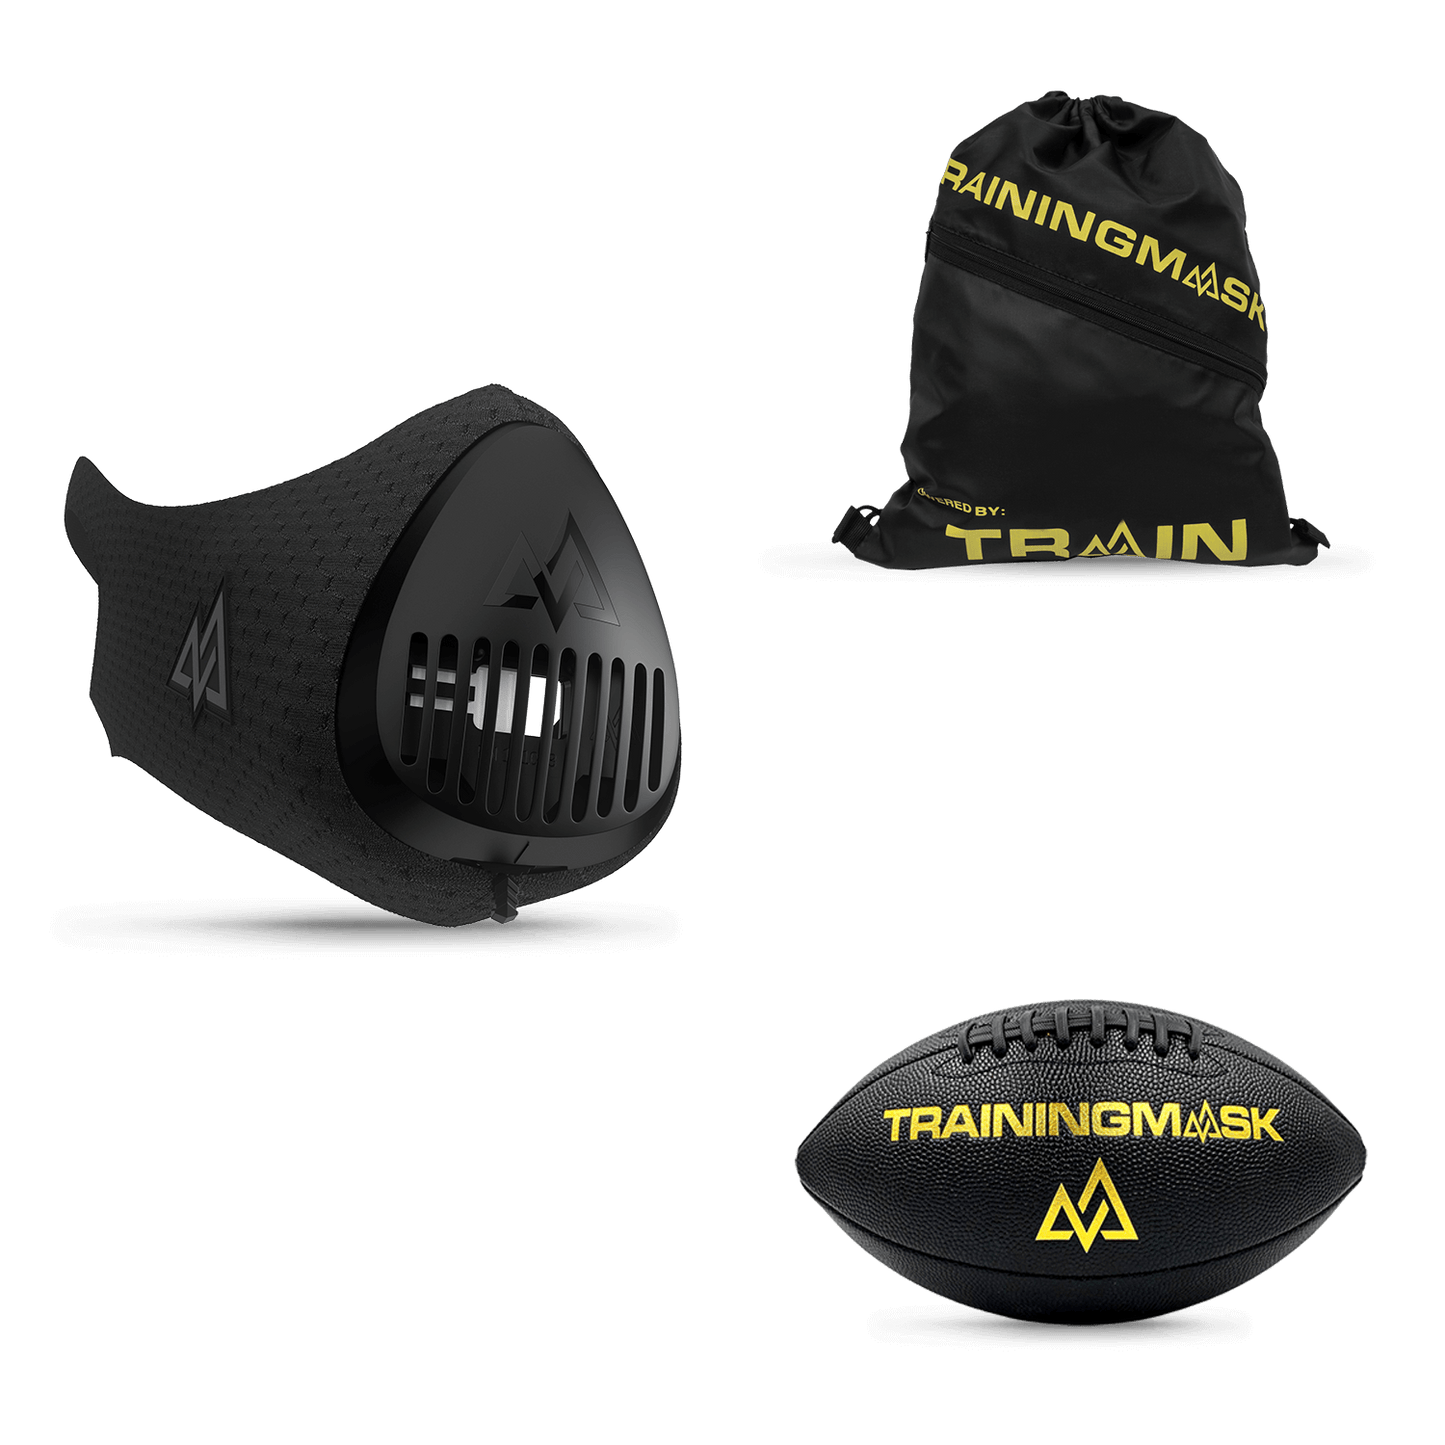 Training Mask Junior- The ultimate training tool for your young